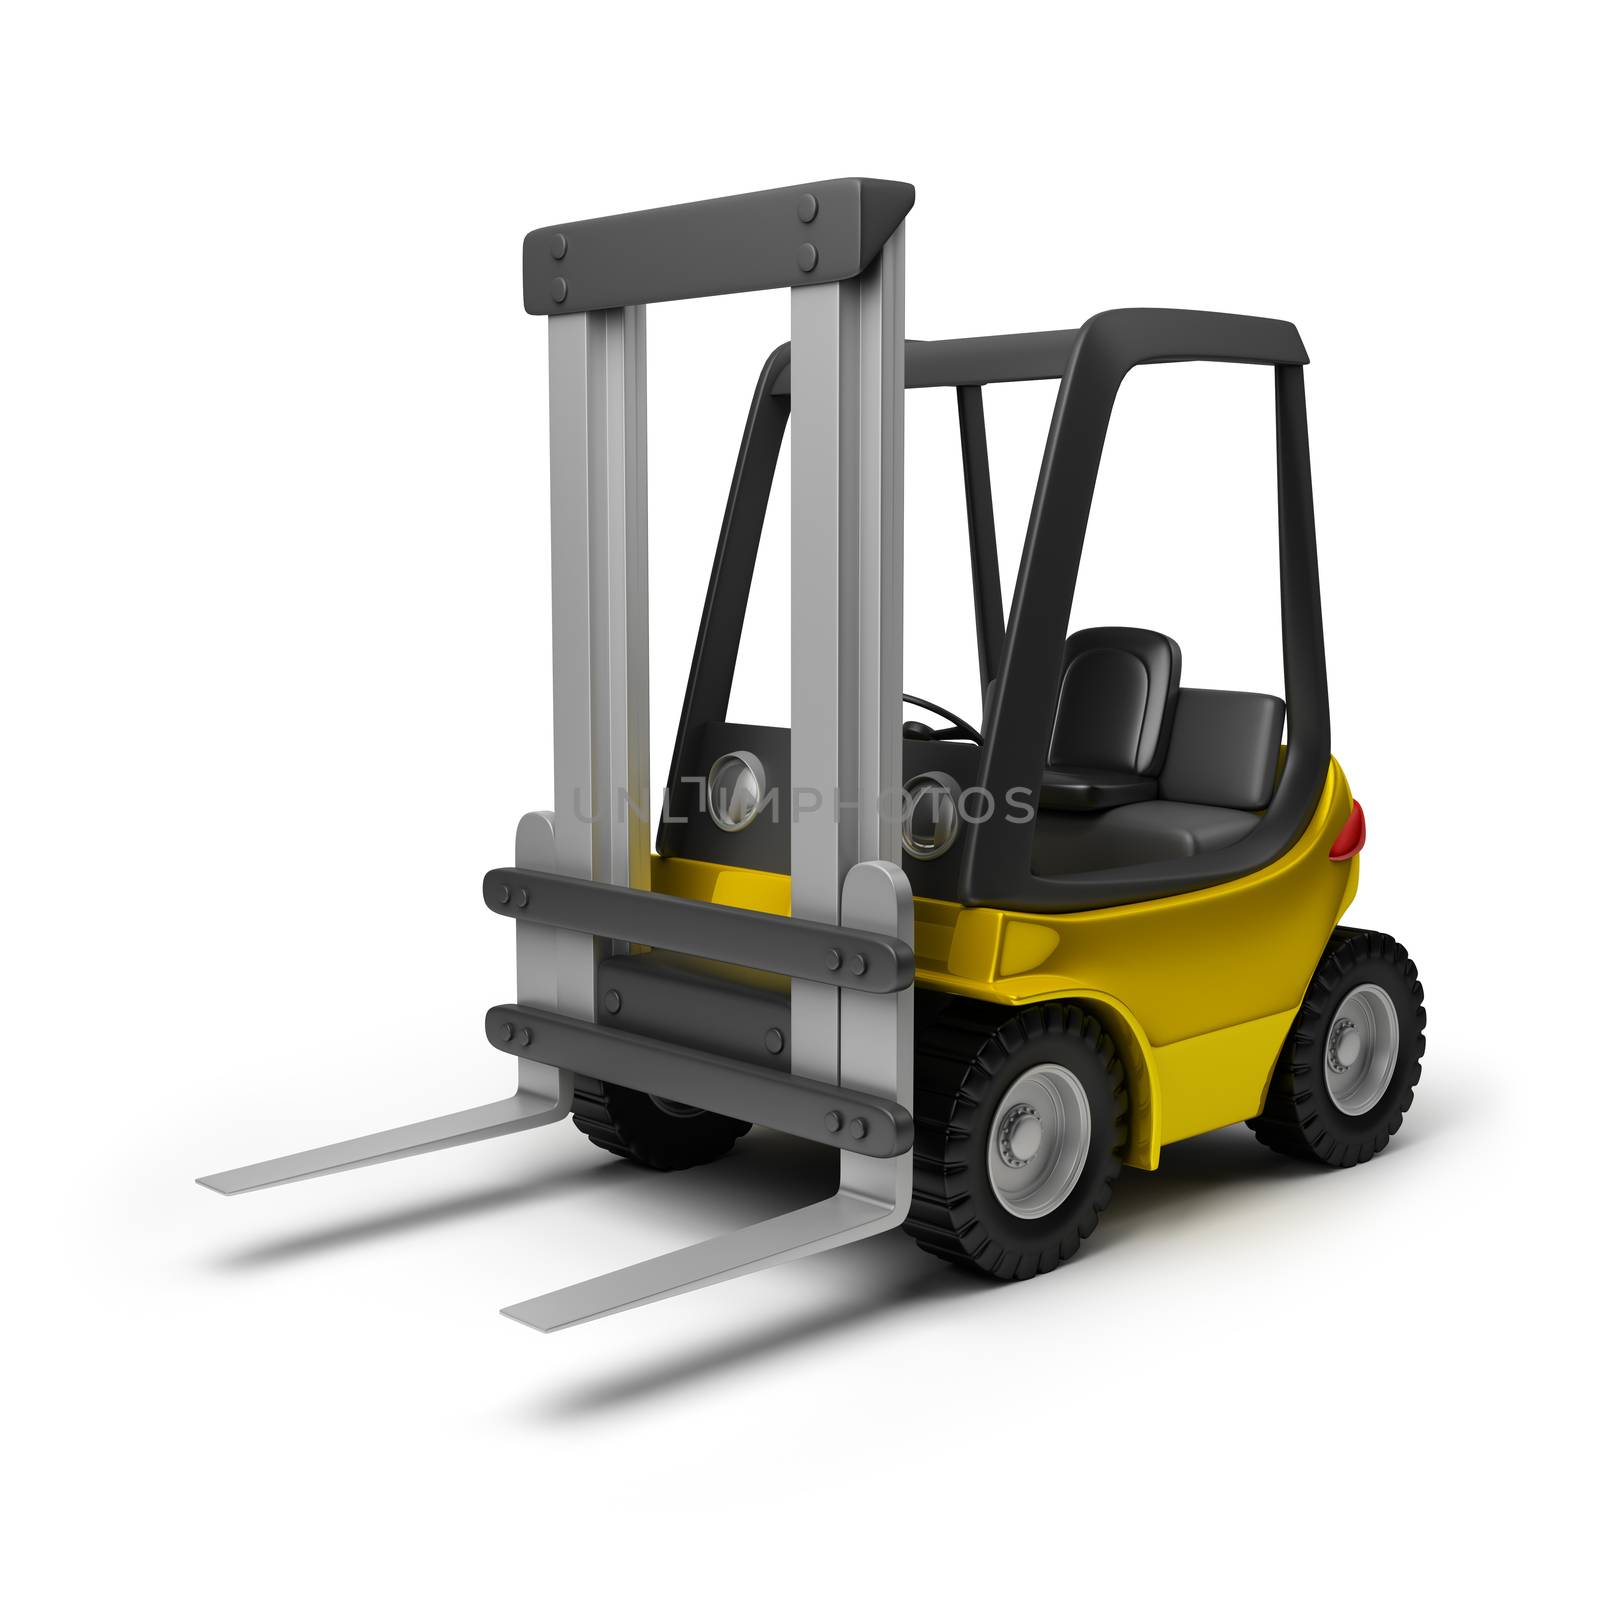 Toy yellow forklift. 3d image. Isolated white background.